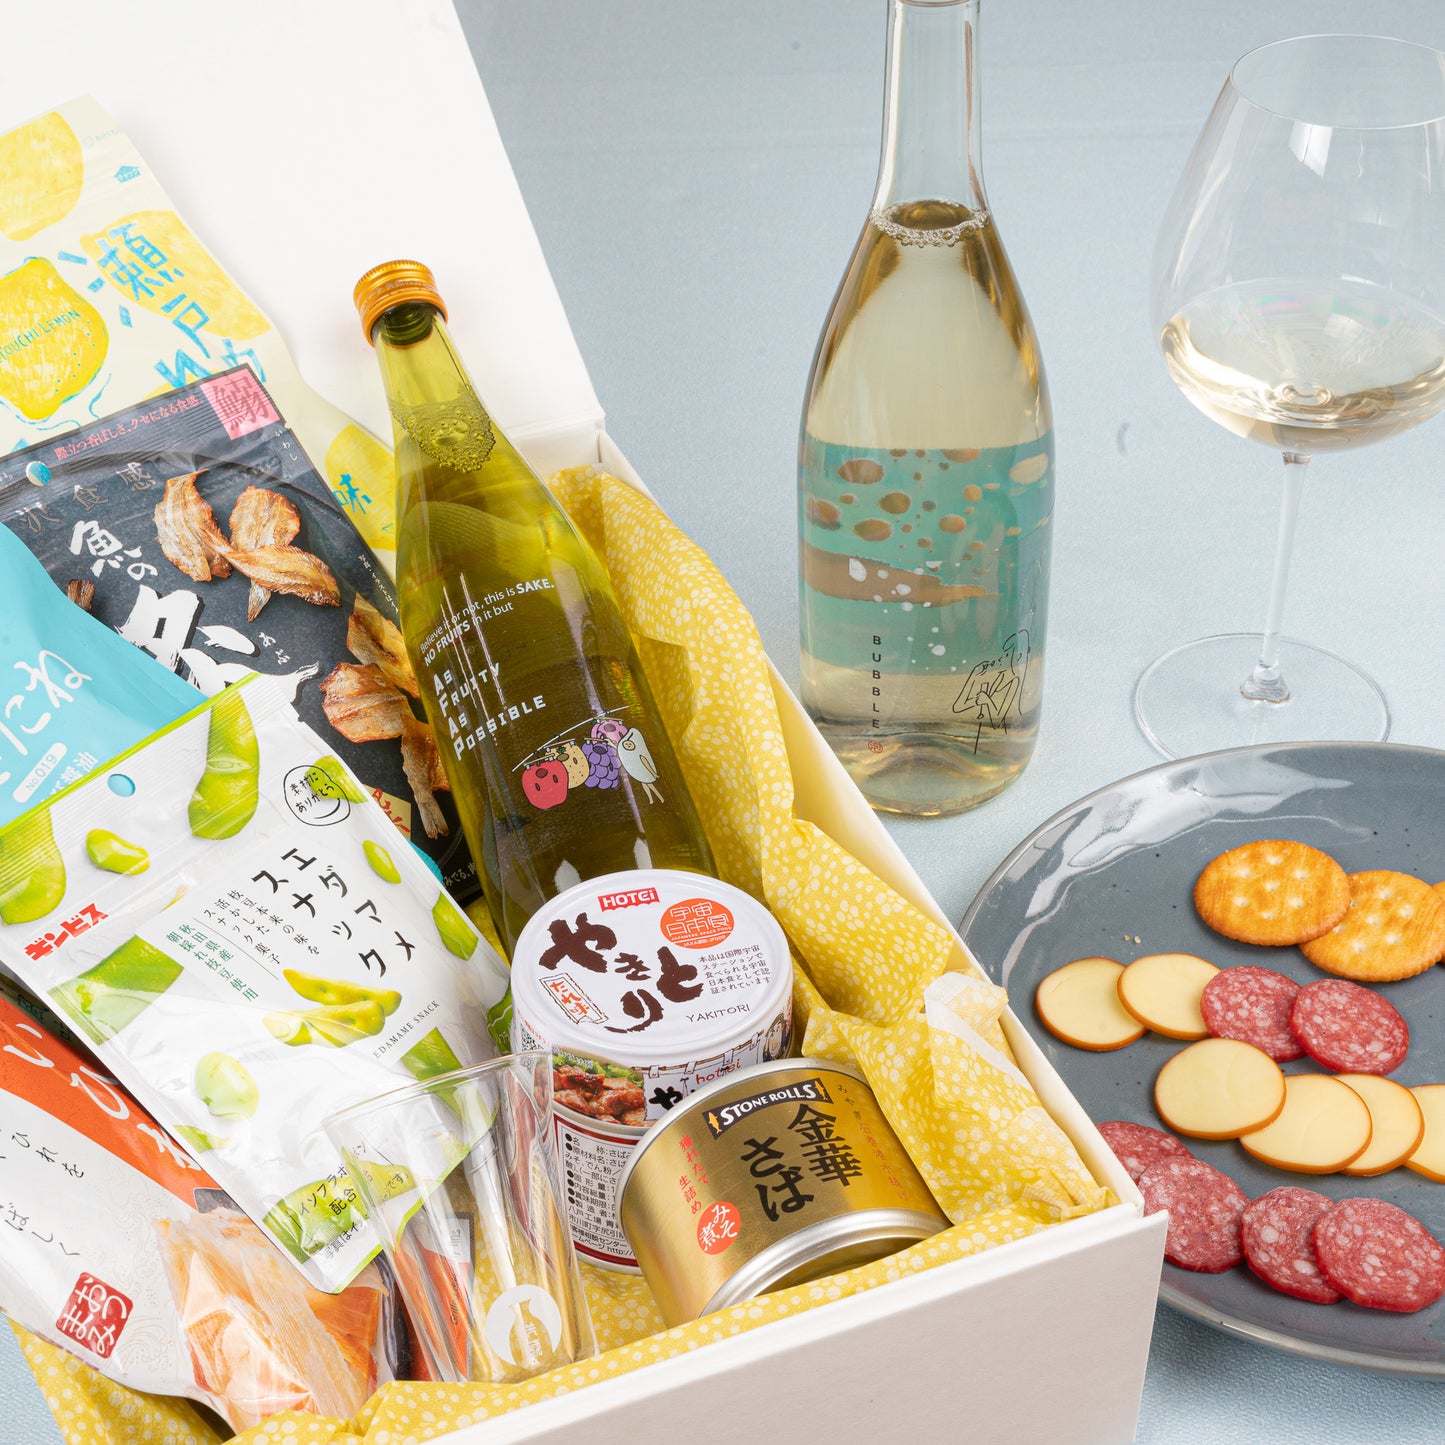 Sweet-fruity sake and Traditional Japanese snack set